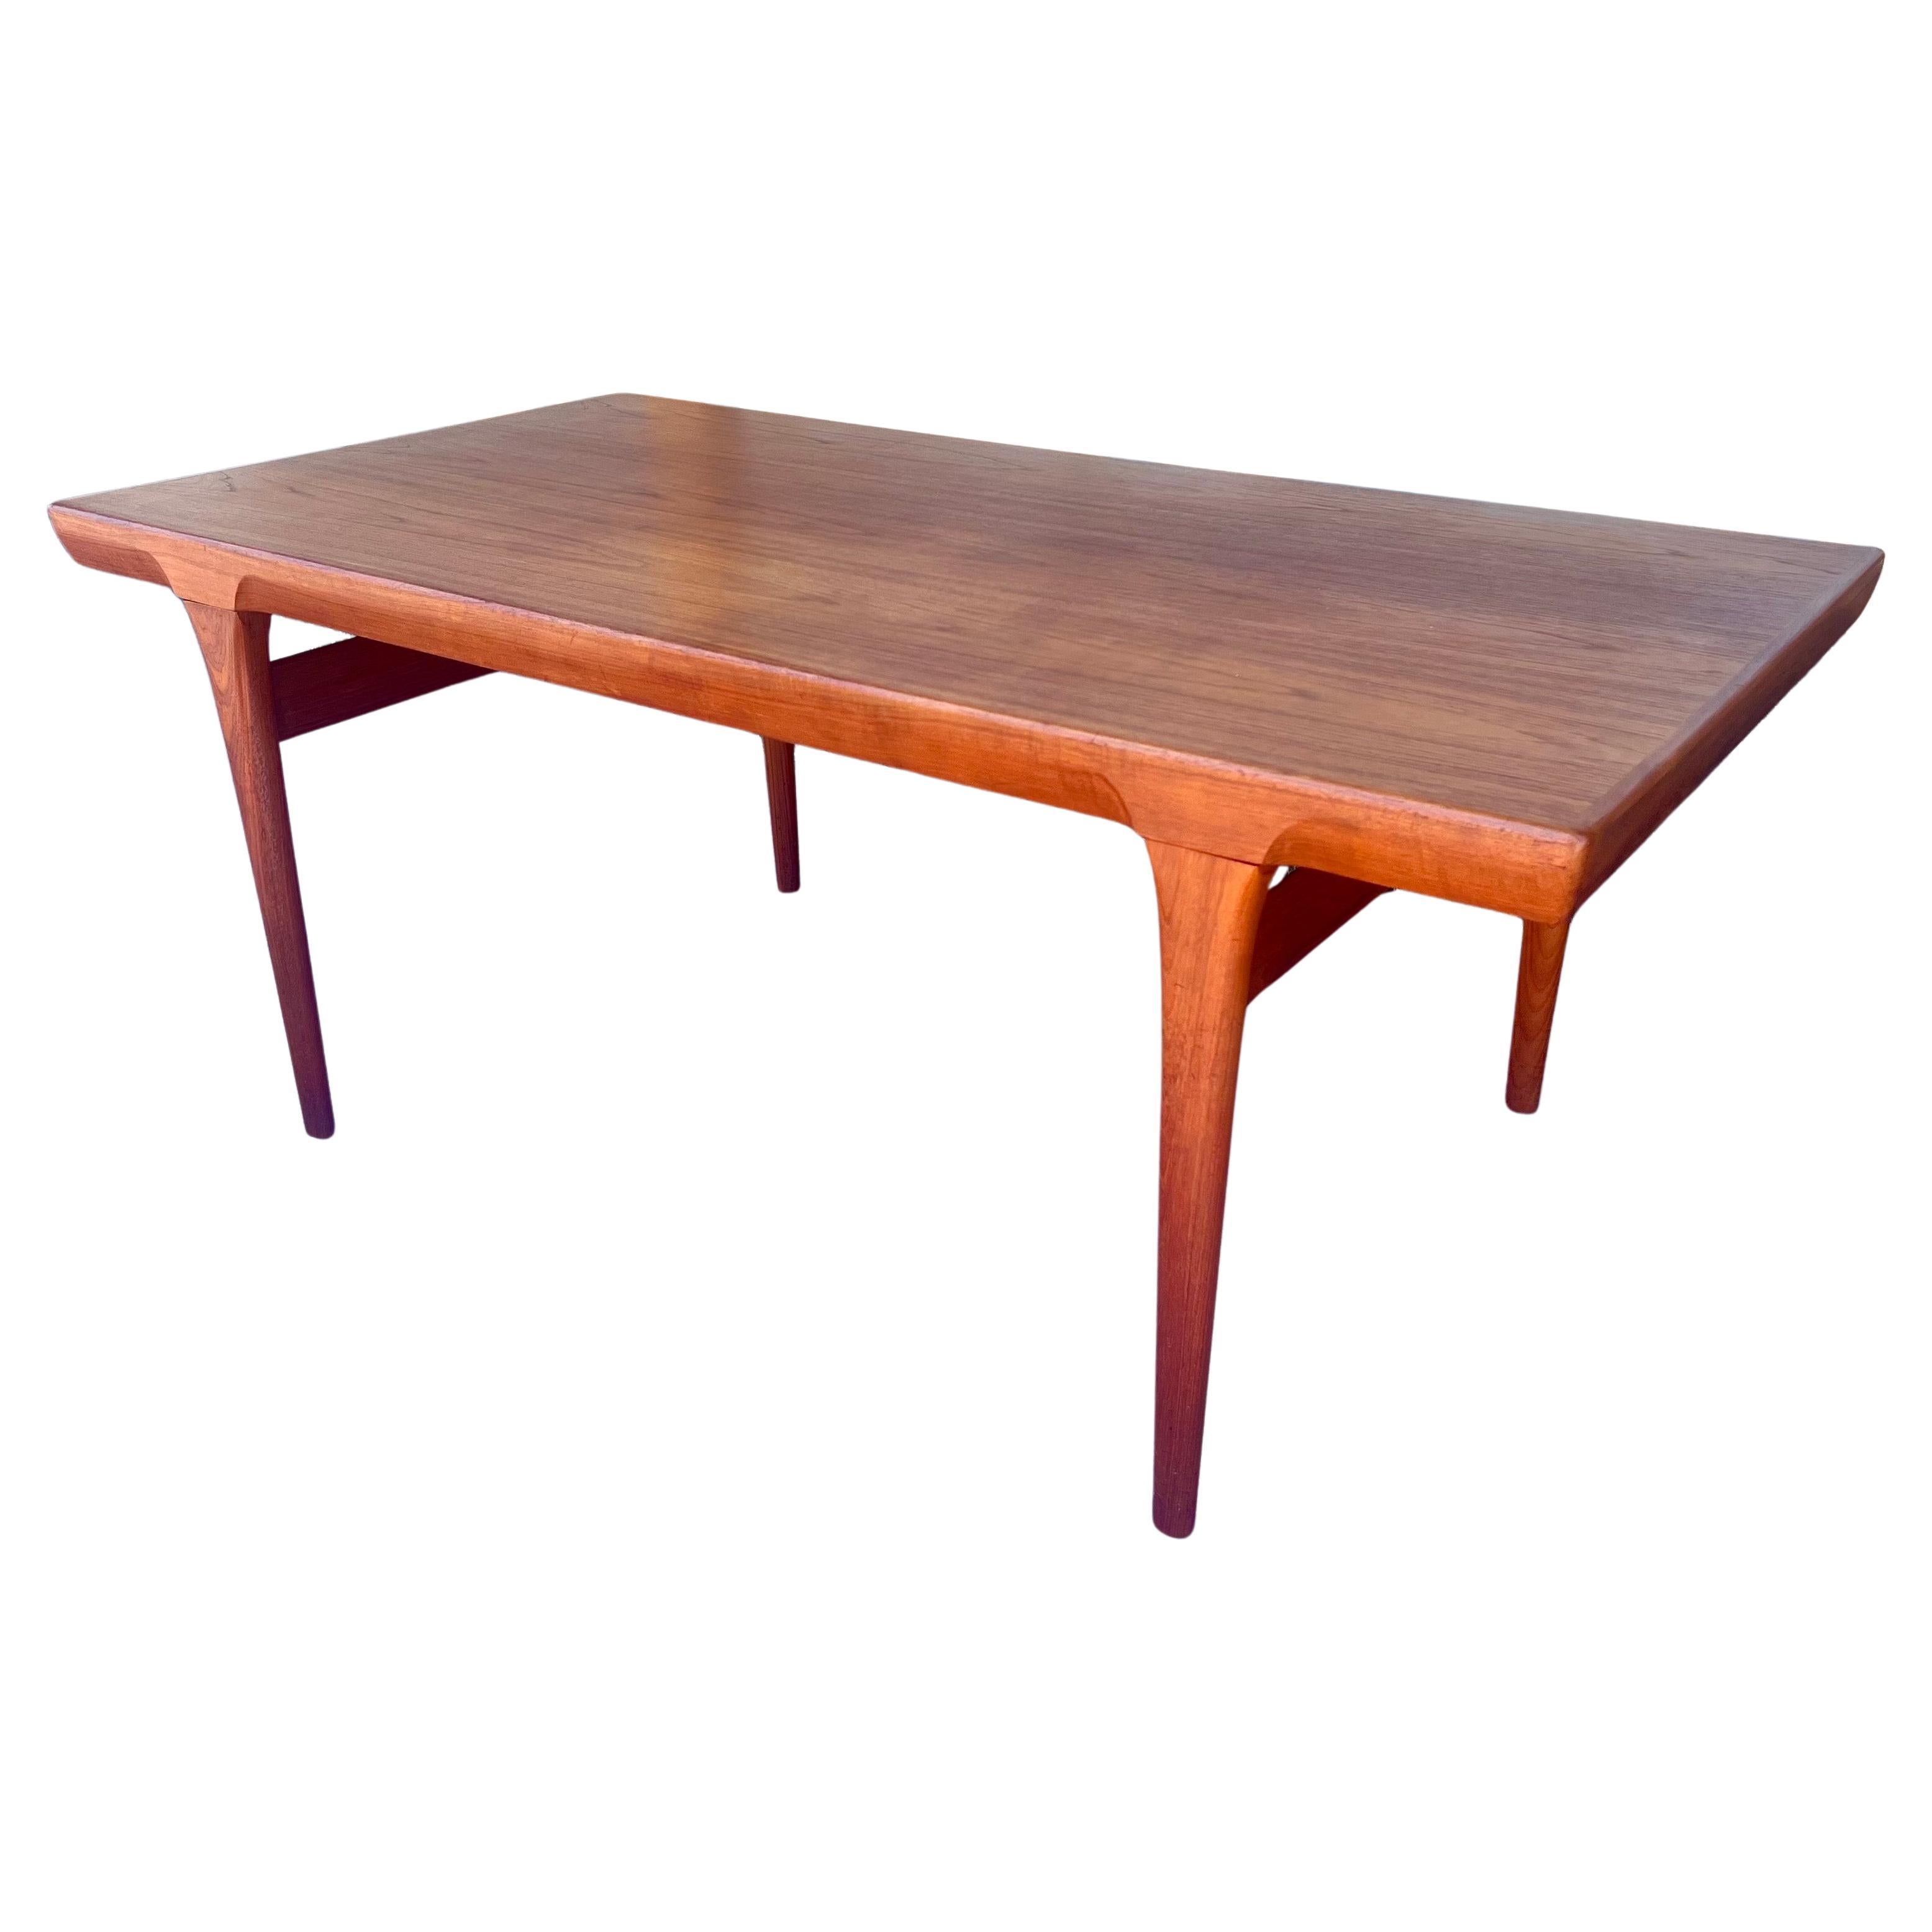 Danish Modern Teak Dining Table With 2 Pull-out Leaves by Johannes Andersen For Sale